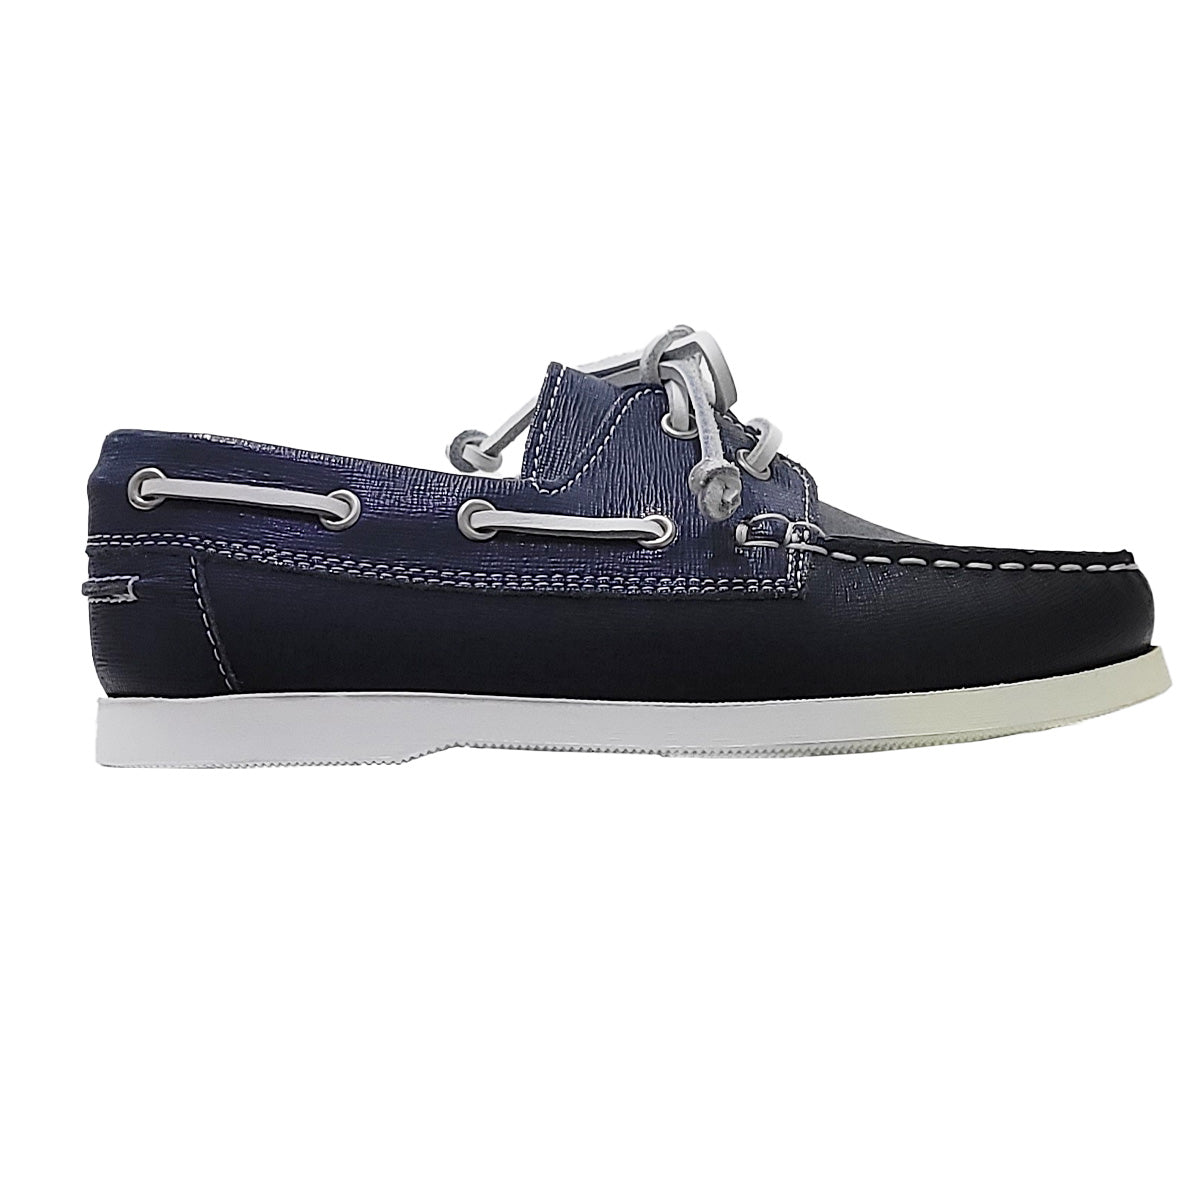 Andrea Montelpare Tradition Shoe -Navy Blue